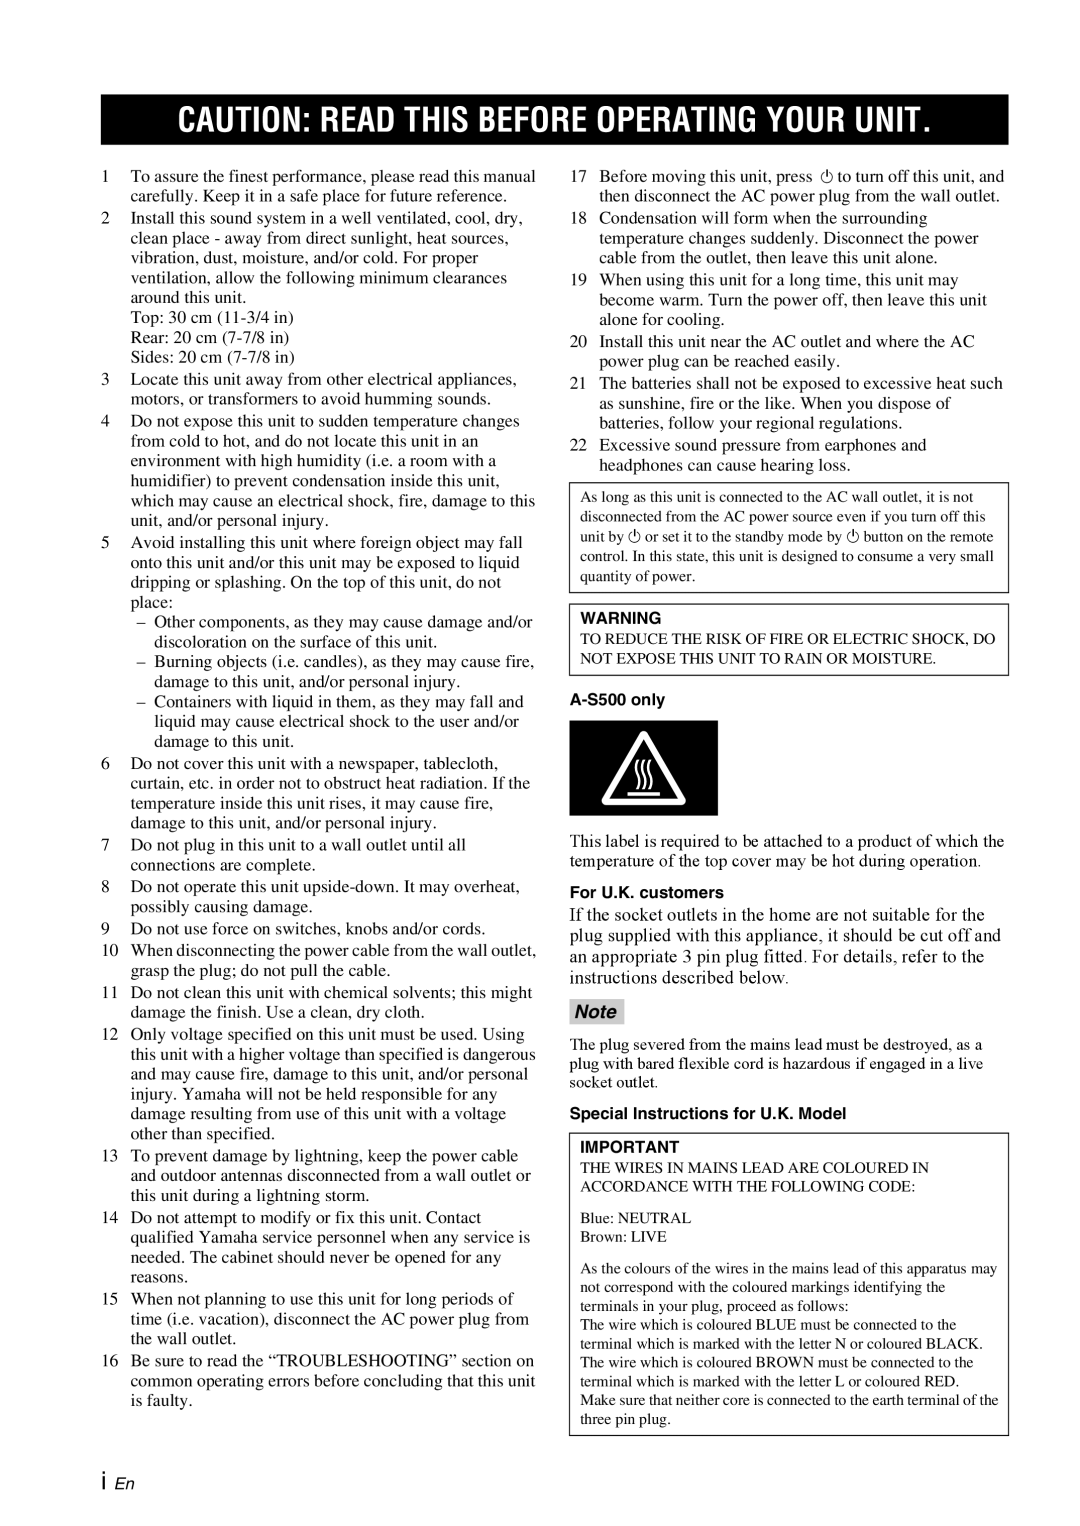 Yamaha A-S300BL owner manual Caution Read This Before Operating Your Unit, i En, A-S500only, For U.K. customers 